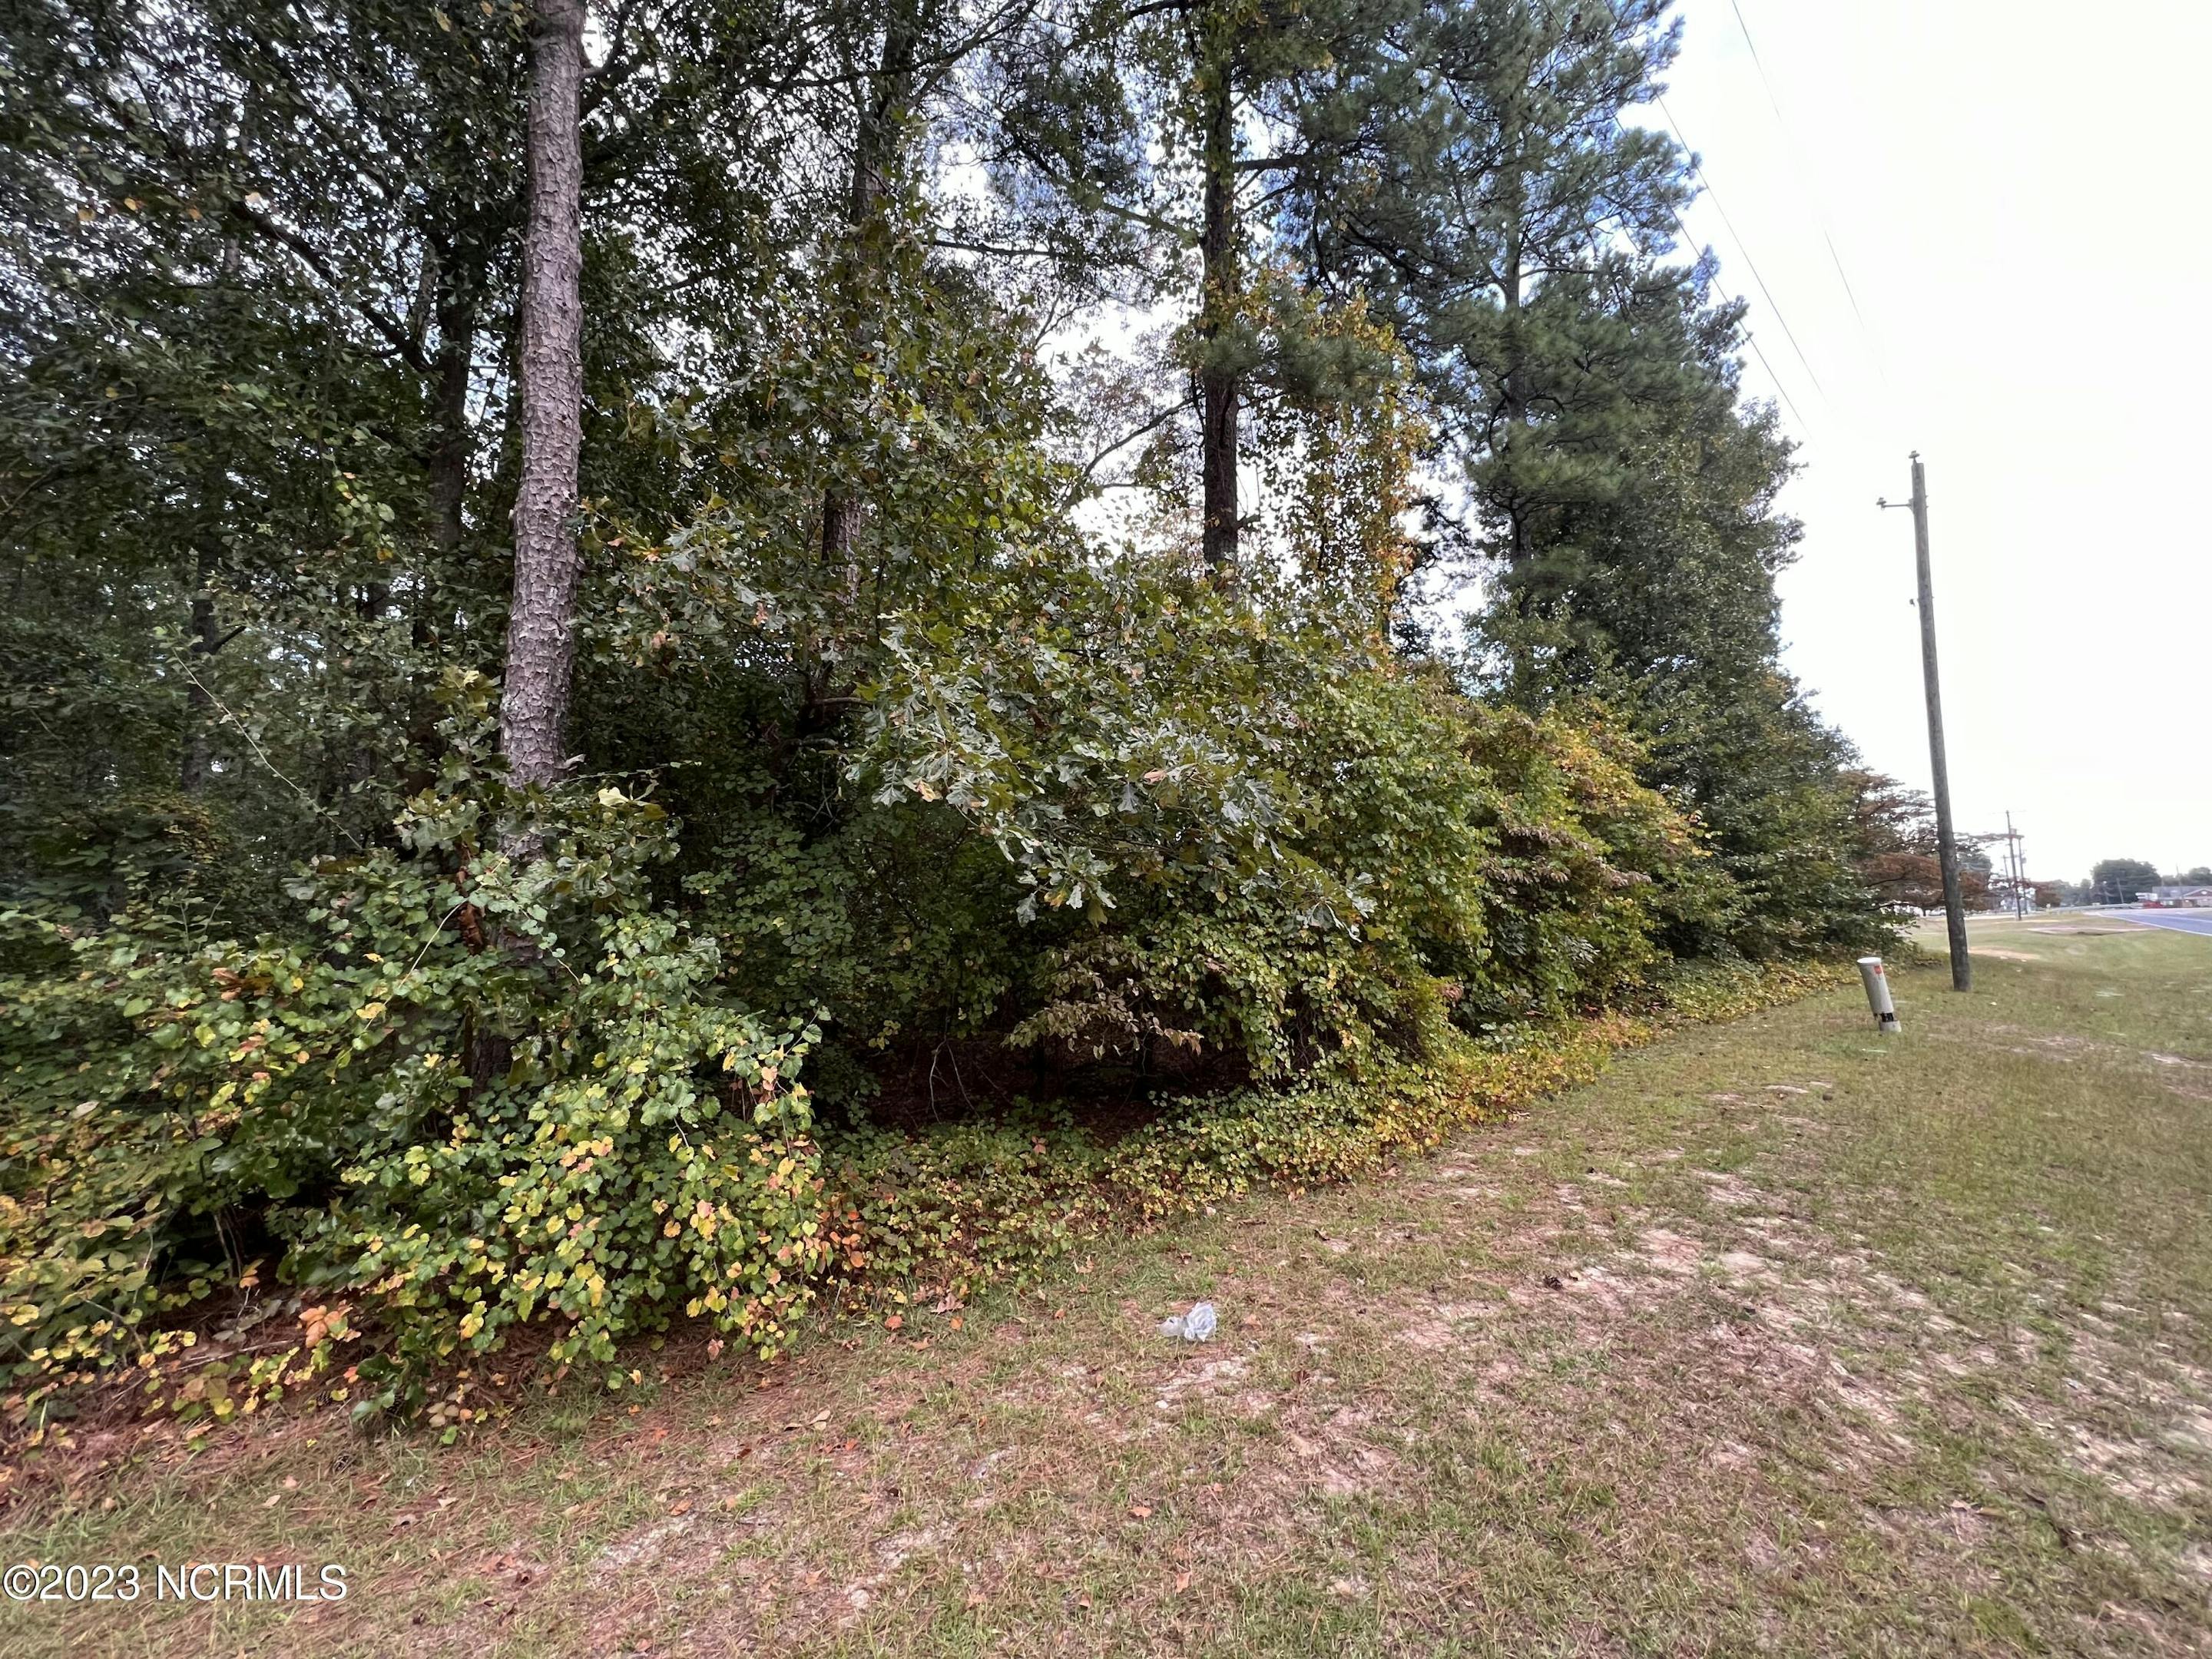 Front left of the 1.0 acre lot